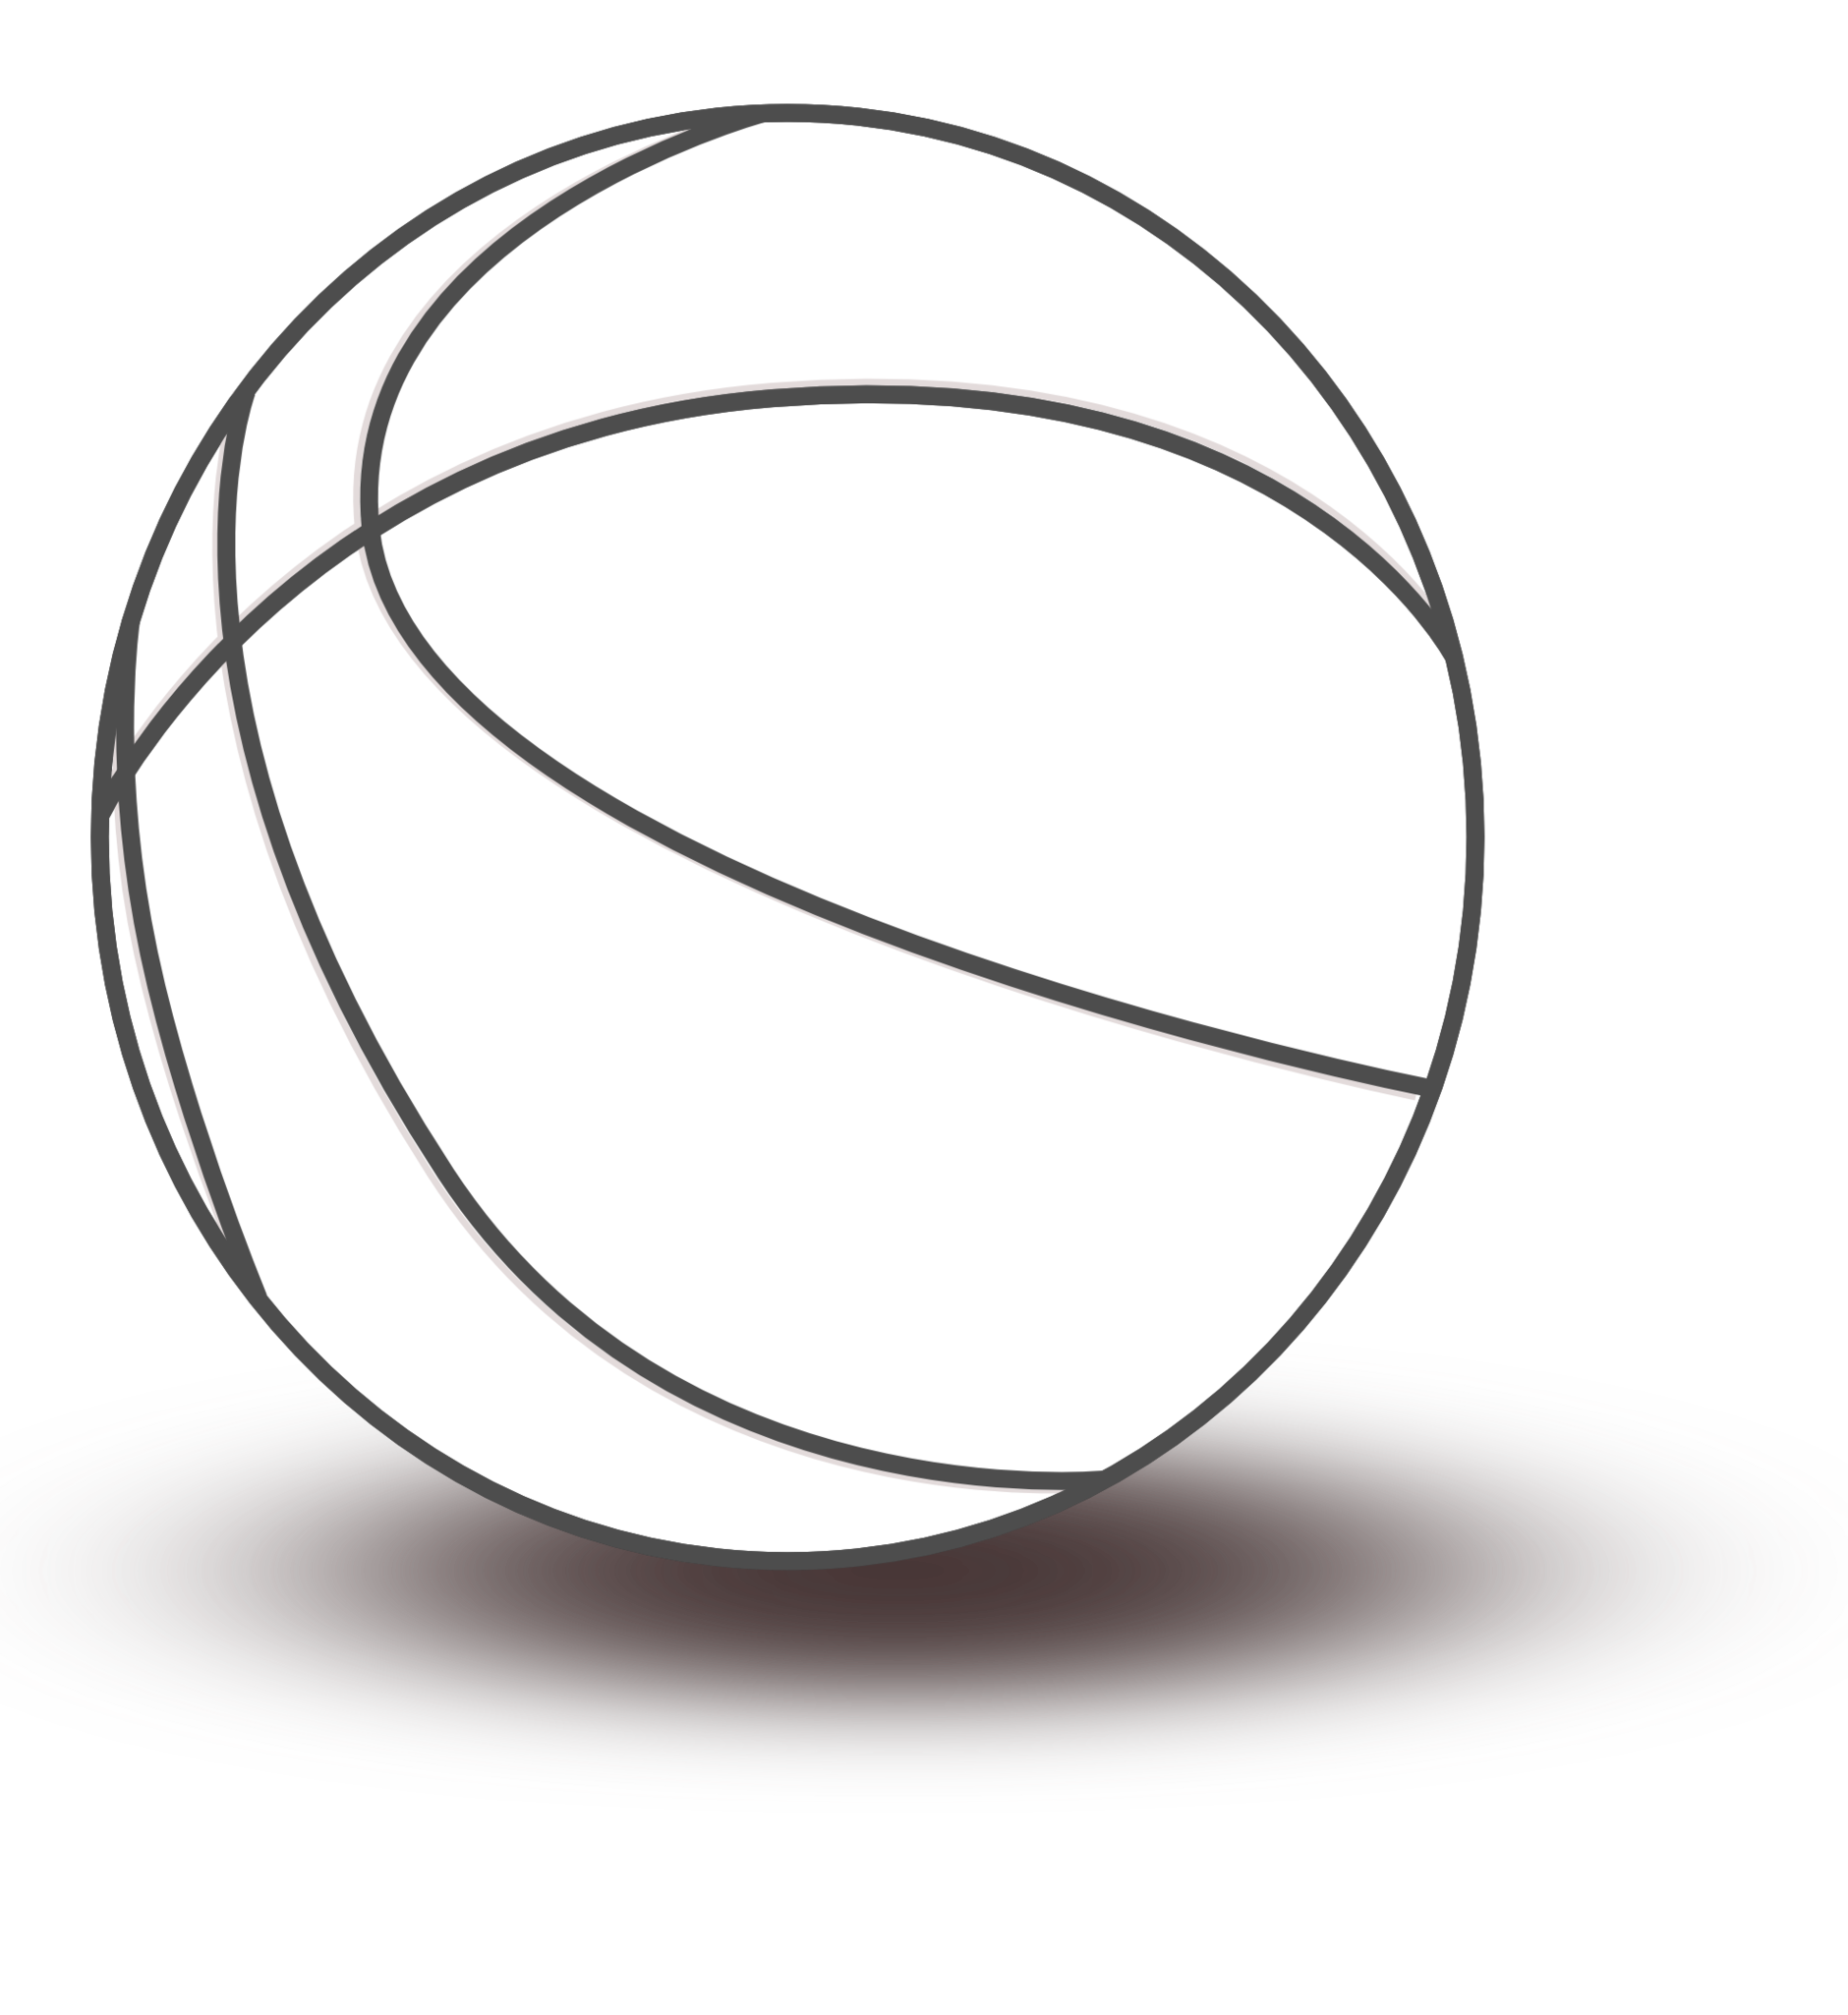 Basketball black and white bl - Basketball Black And White Clipart